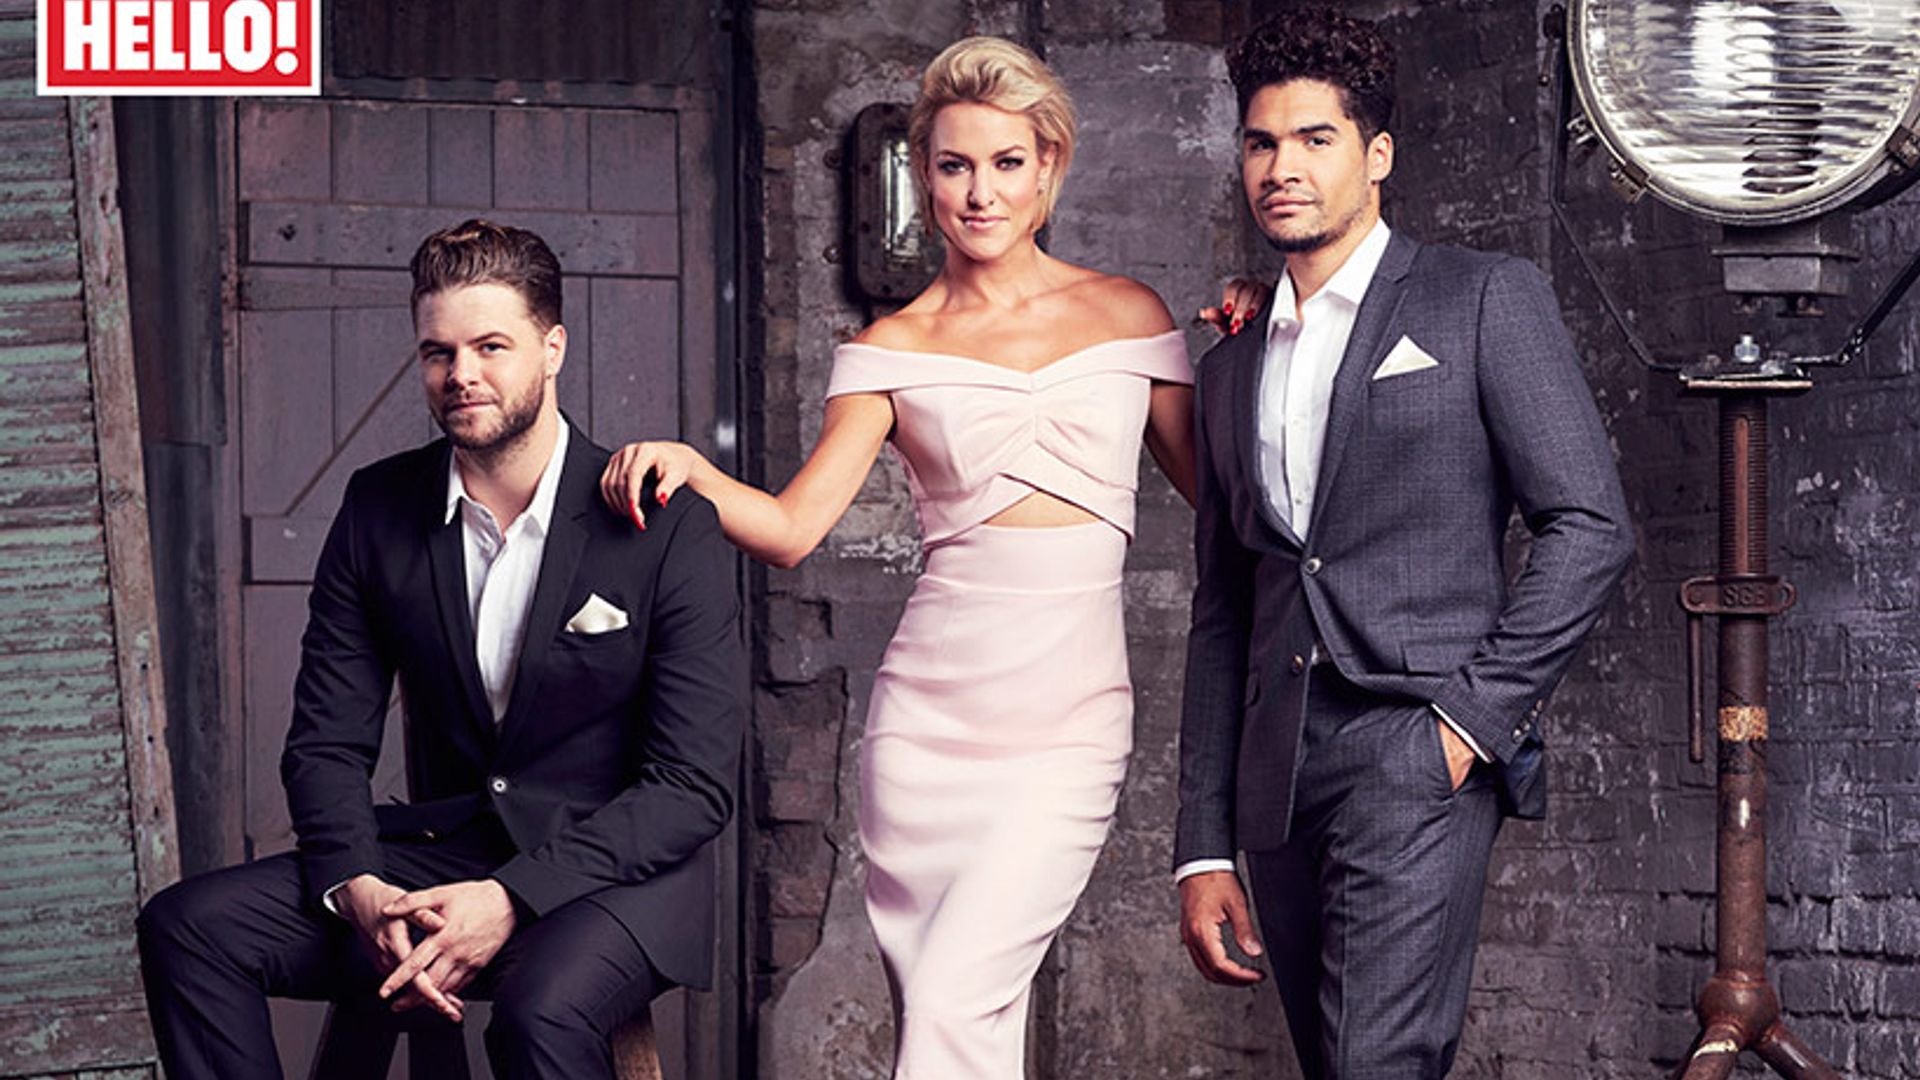 Exclusive! Strictly stars Natalie Lowe, Louis Smith and Jay McGuiness discuss working on the Rip it Up musical